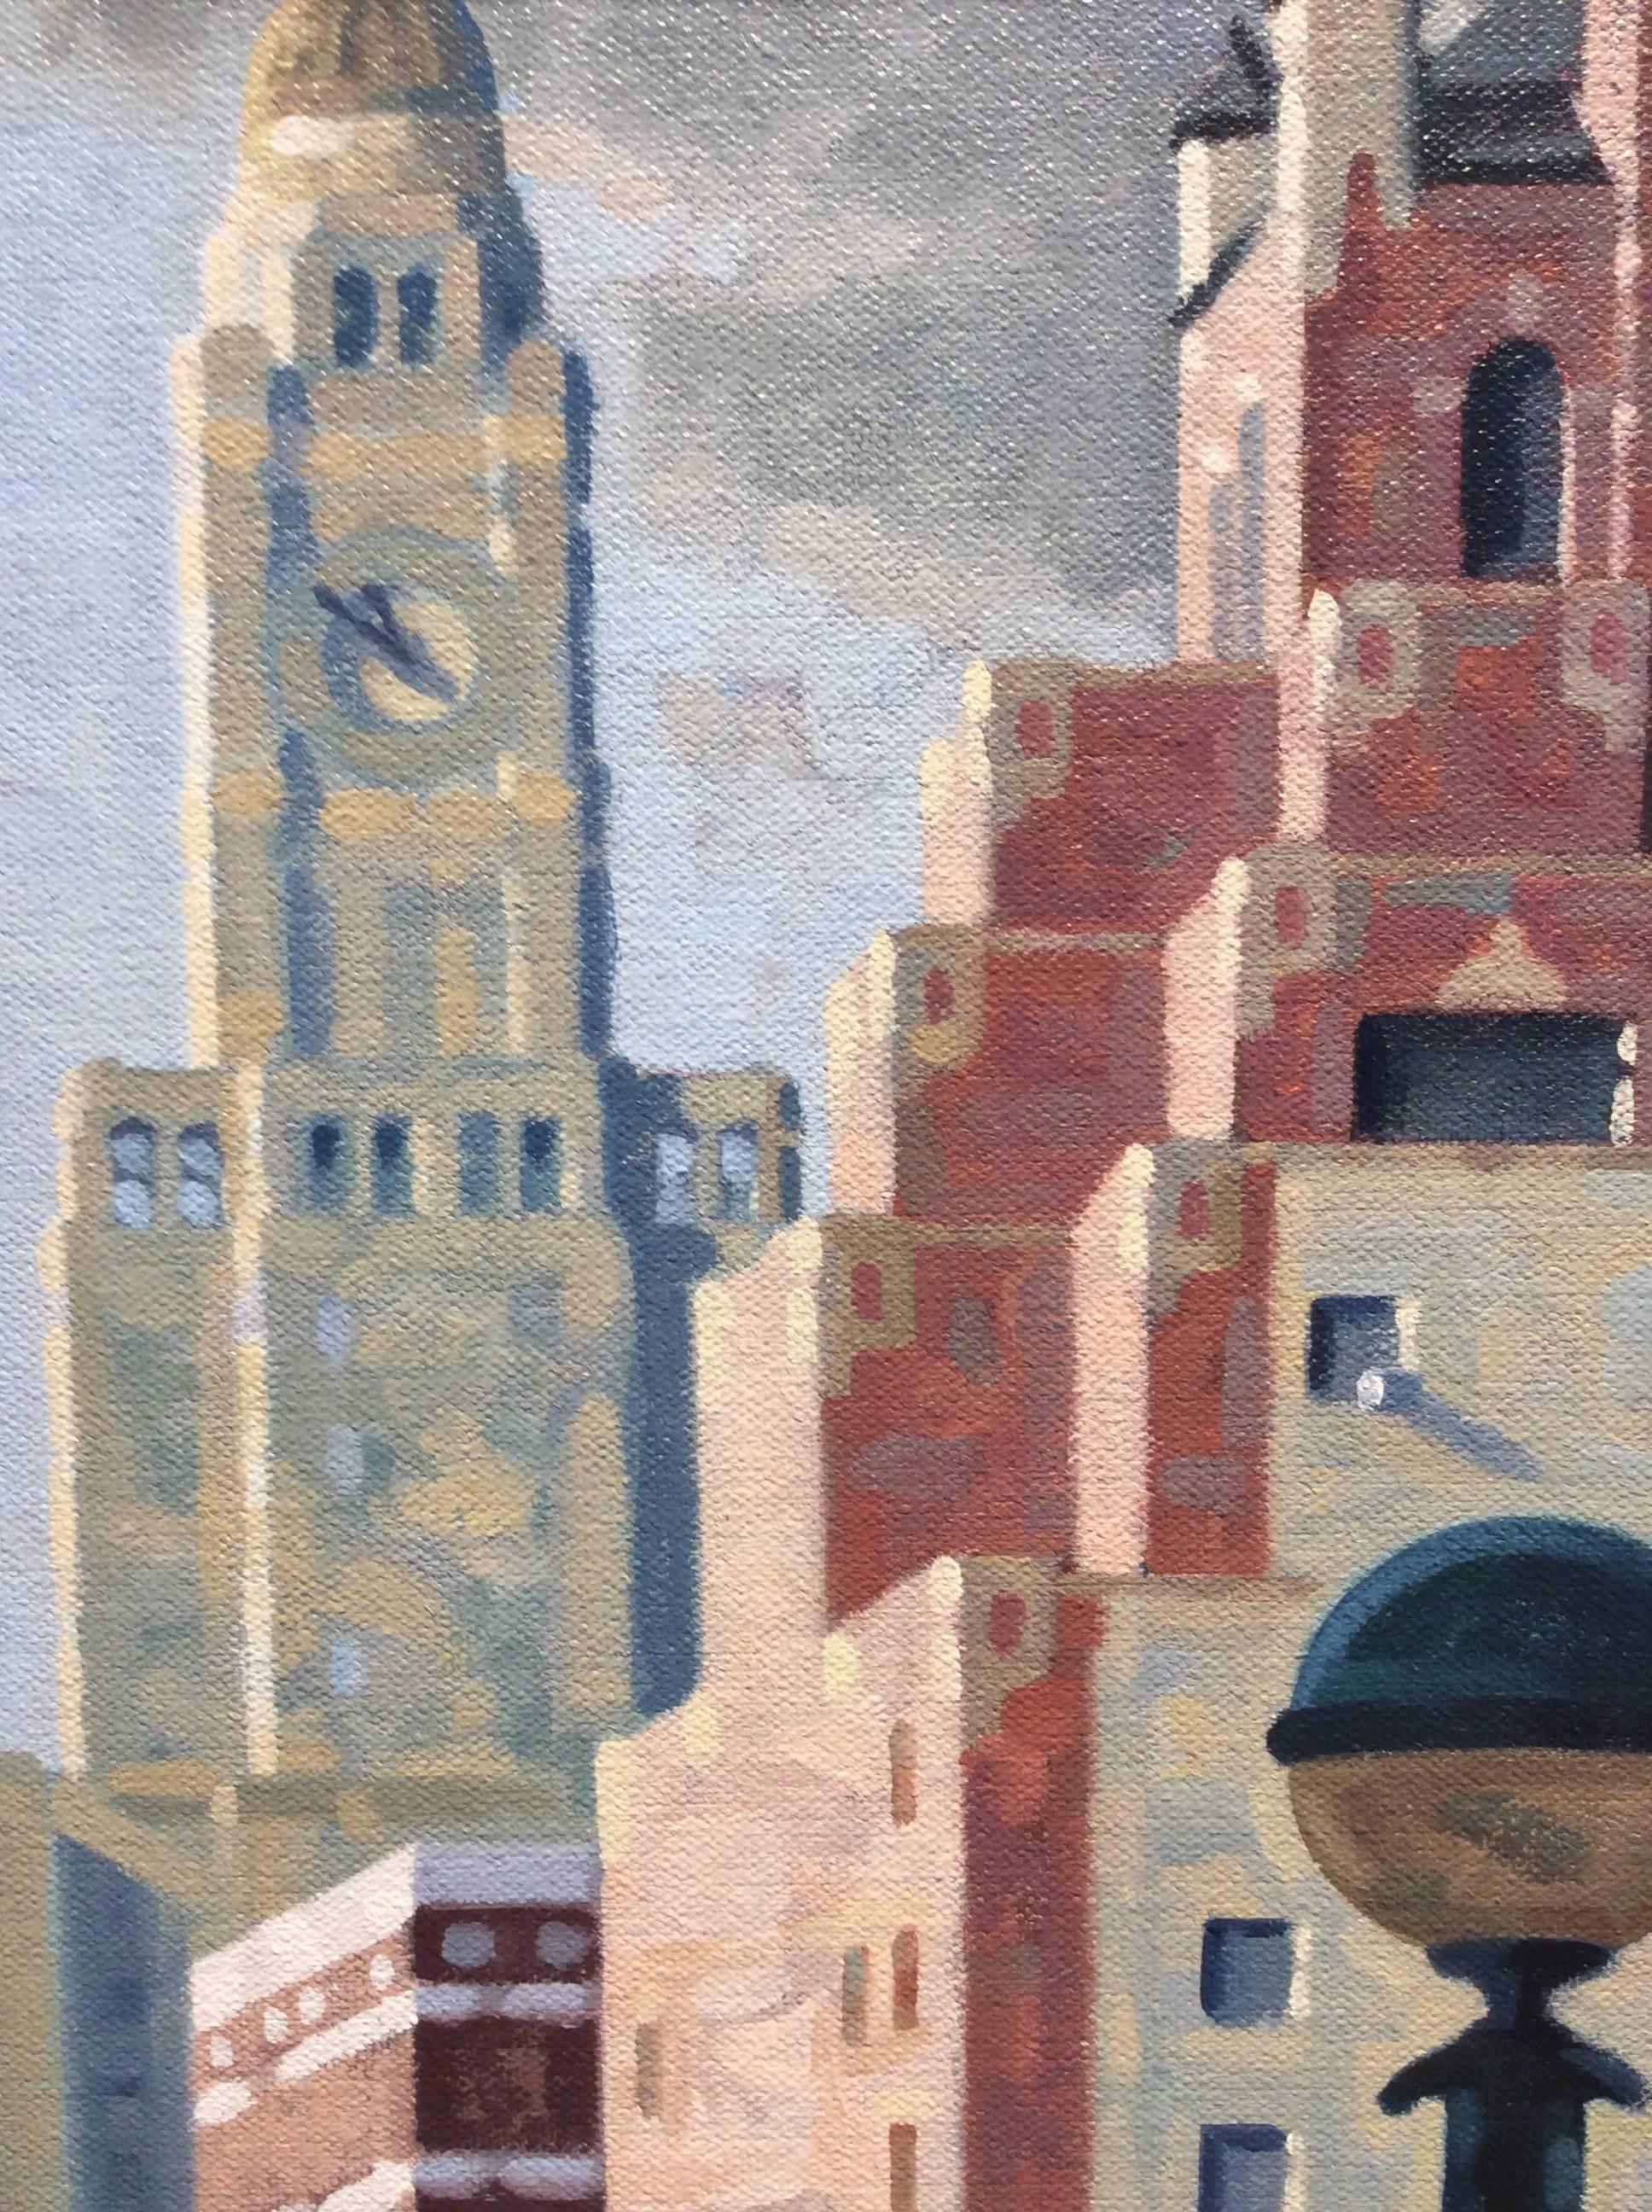 10:50 AM, Study (Small Vertical Cityscape Painting of Williamsburg, Brooklyn) 3